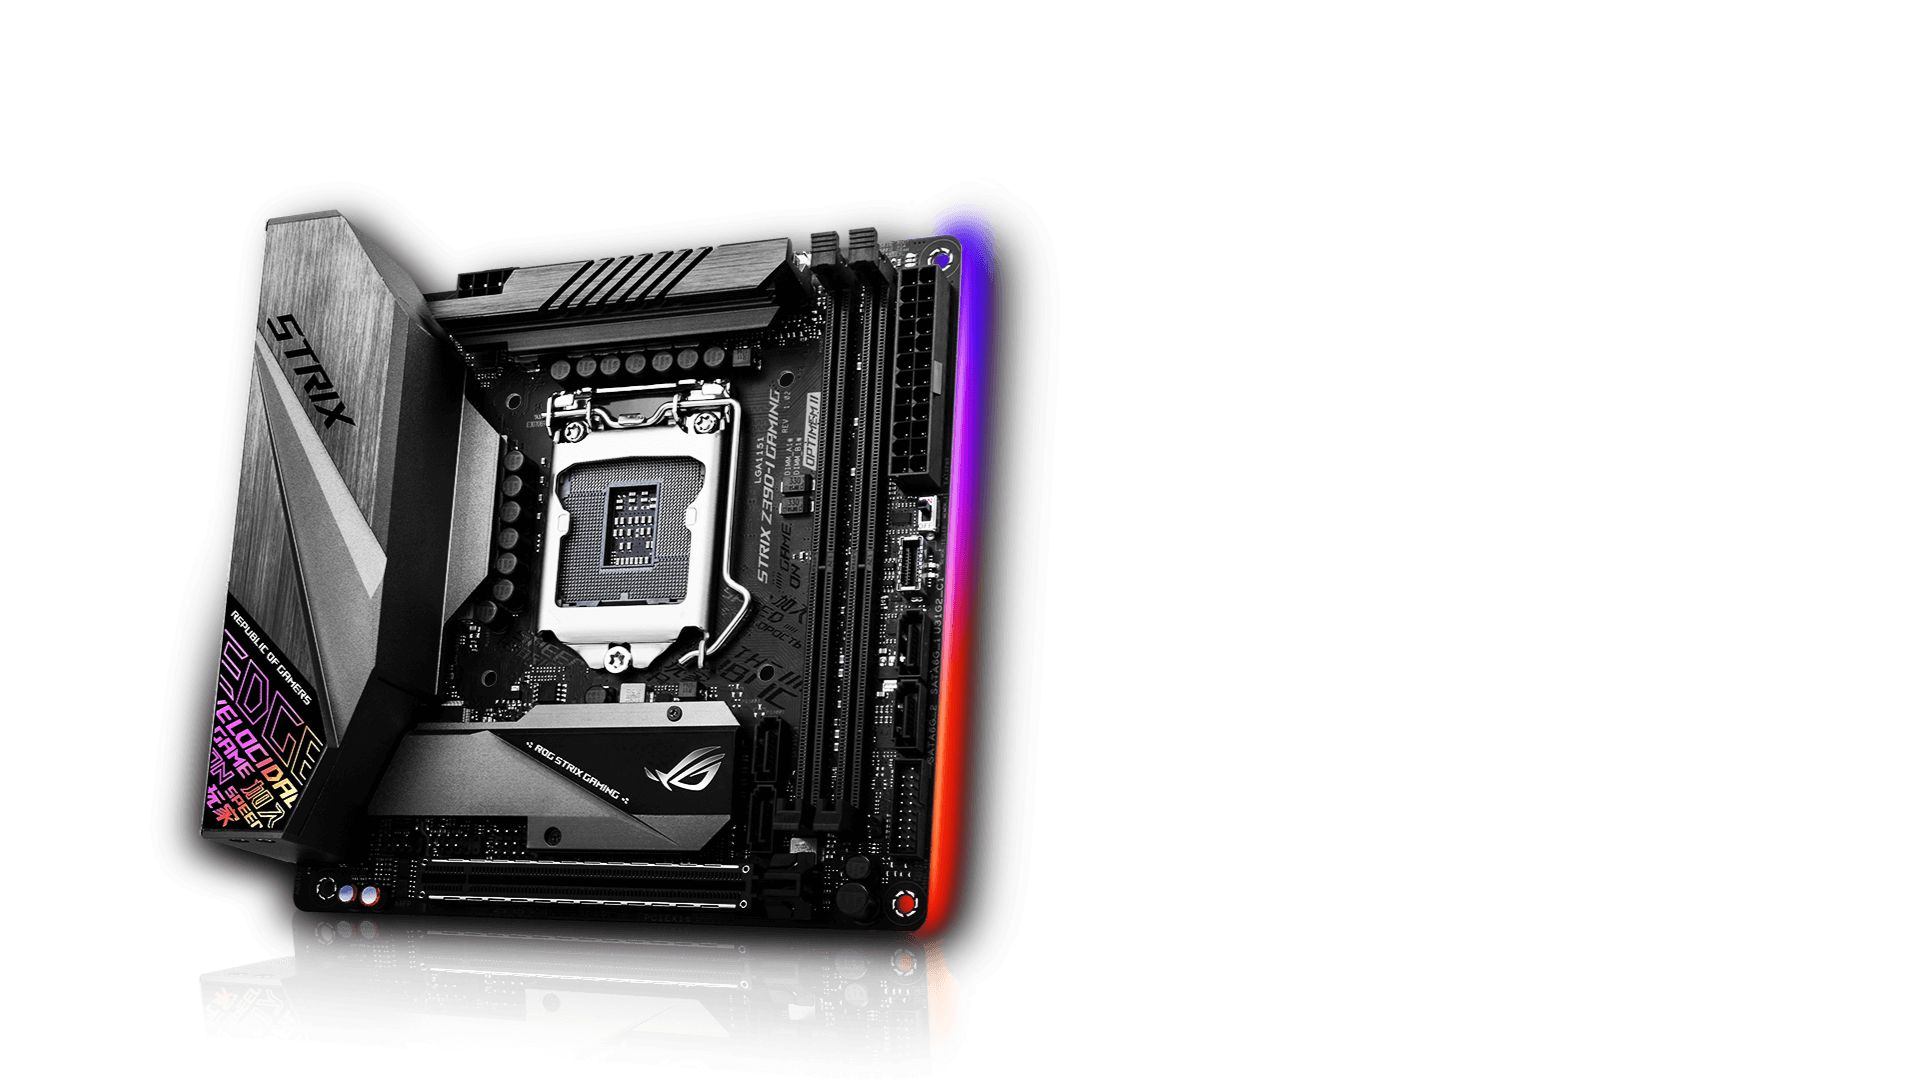 What PC Case Will Fit My ASUS – ROG Strix Z390-E Gaming ATX LGA1151 Motherboard